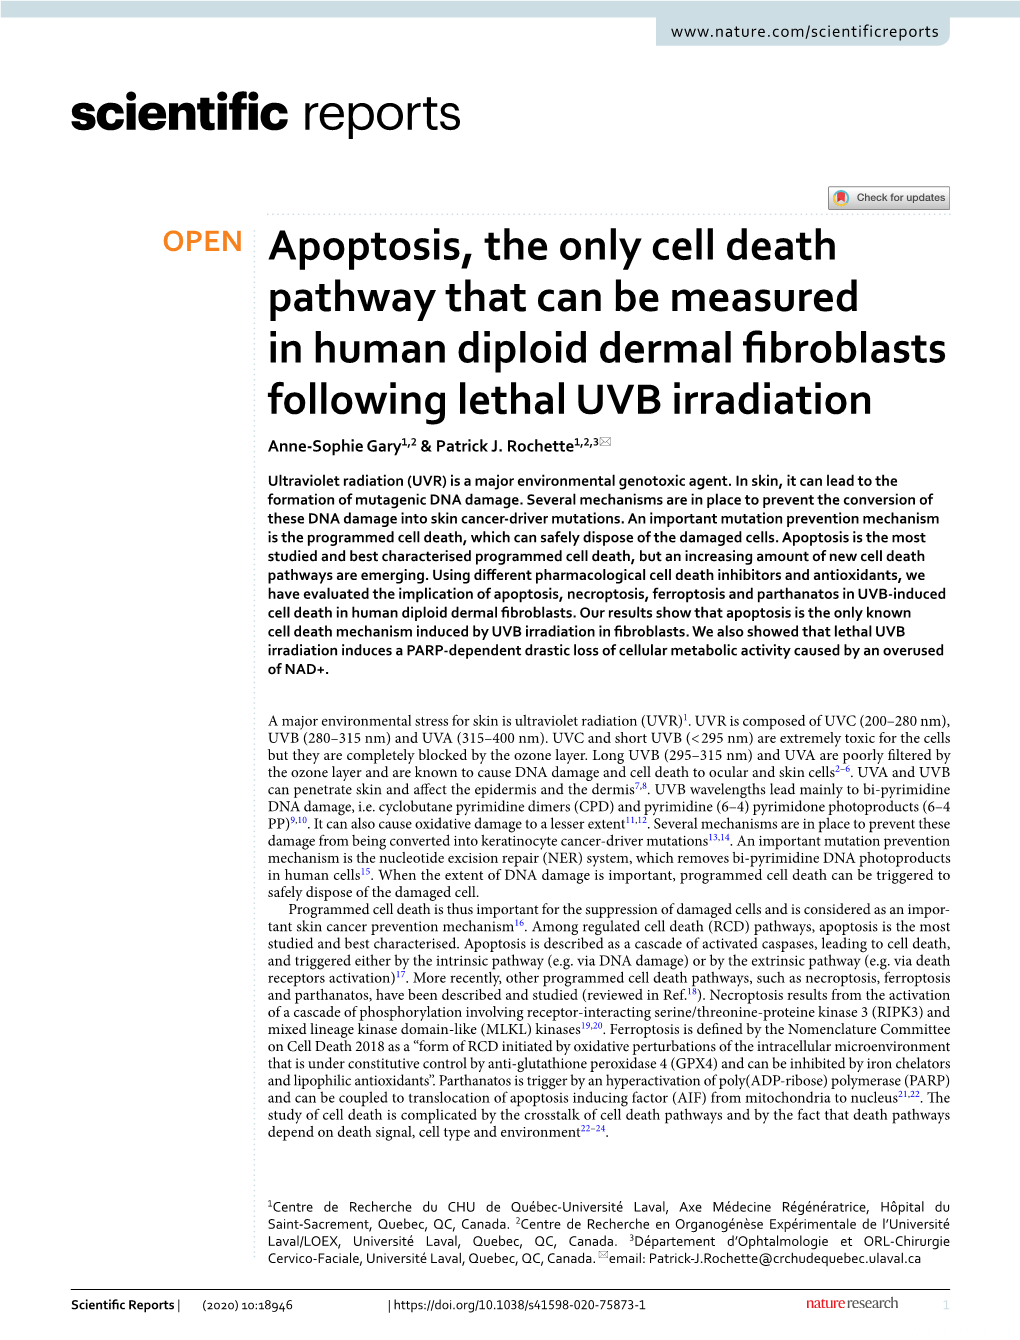 Apoptosis, the Only Cell Death Pathway That Can Be Measured in Human Diploid Dermal Fbroblasts Following Lethal UVB Irradiation Anne‑Sophie Gary1,2 & Patrick J